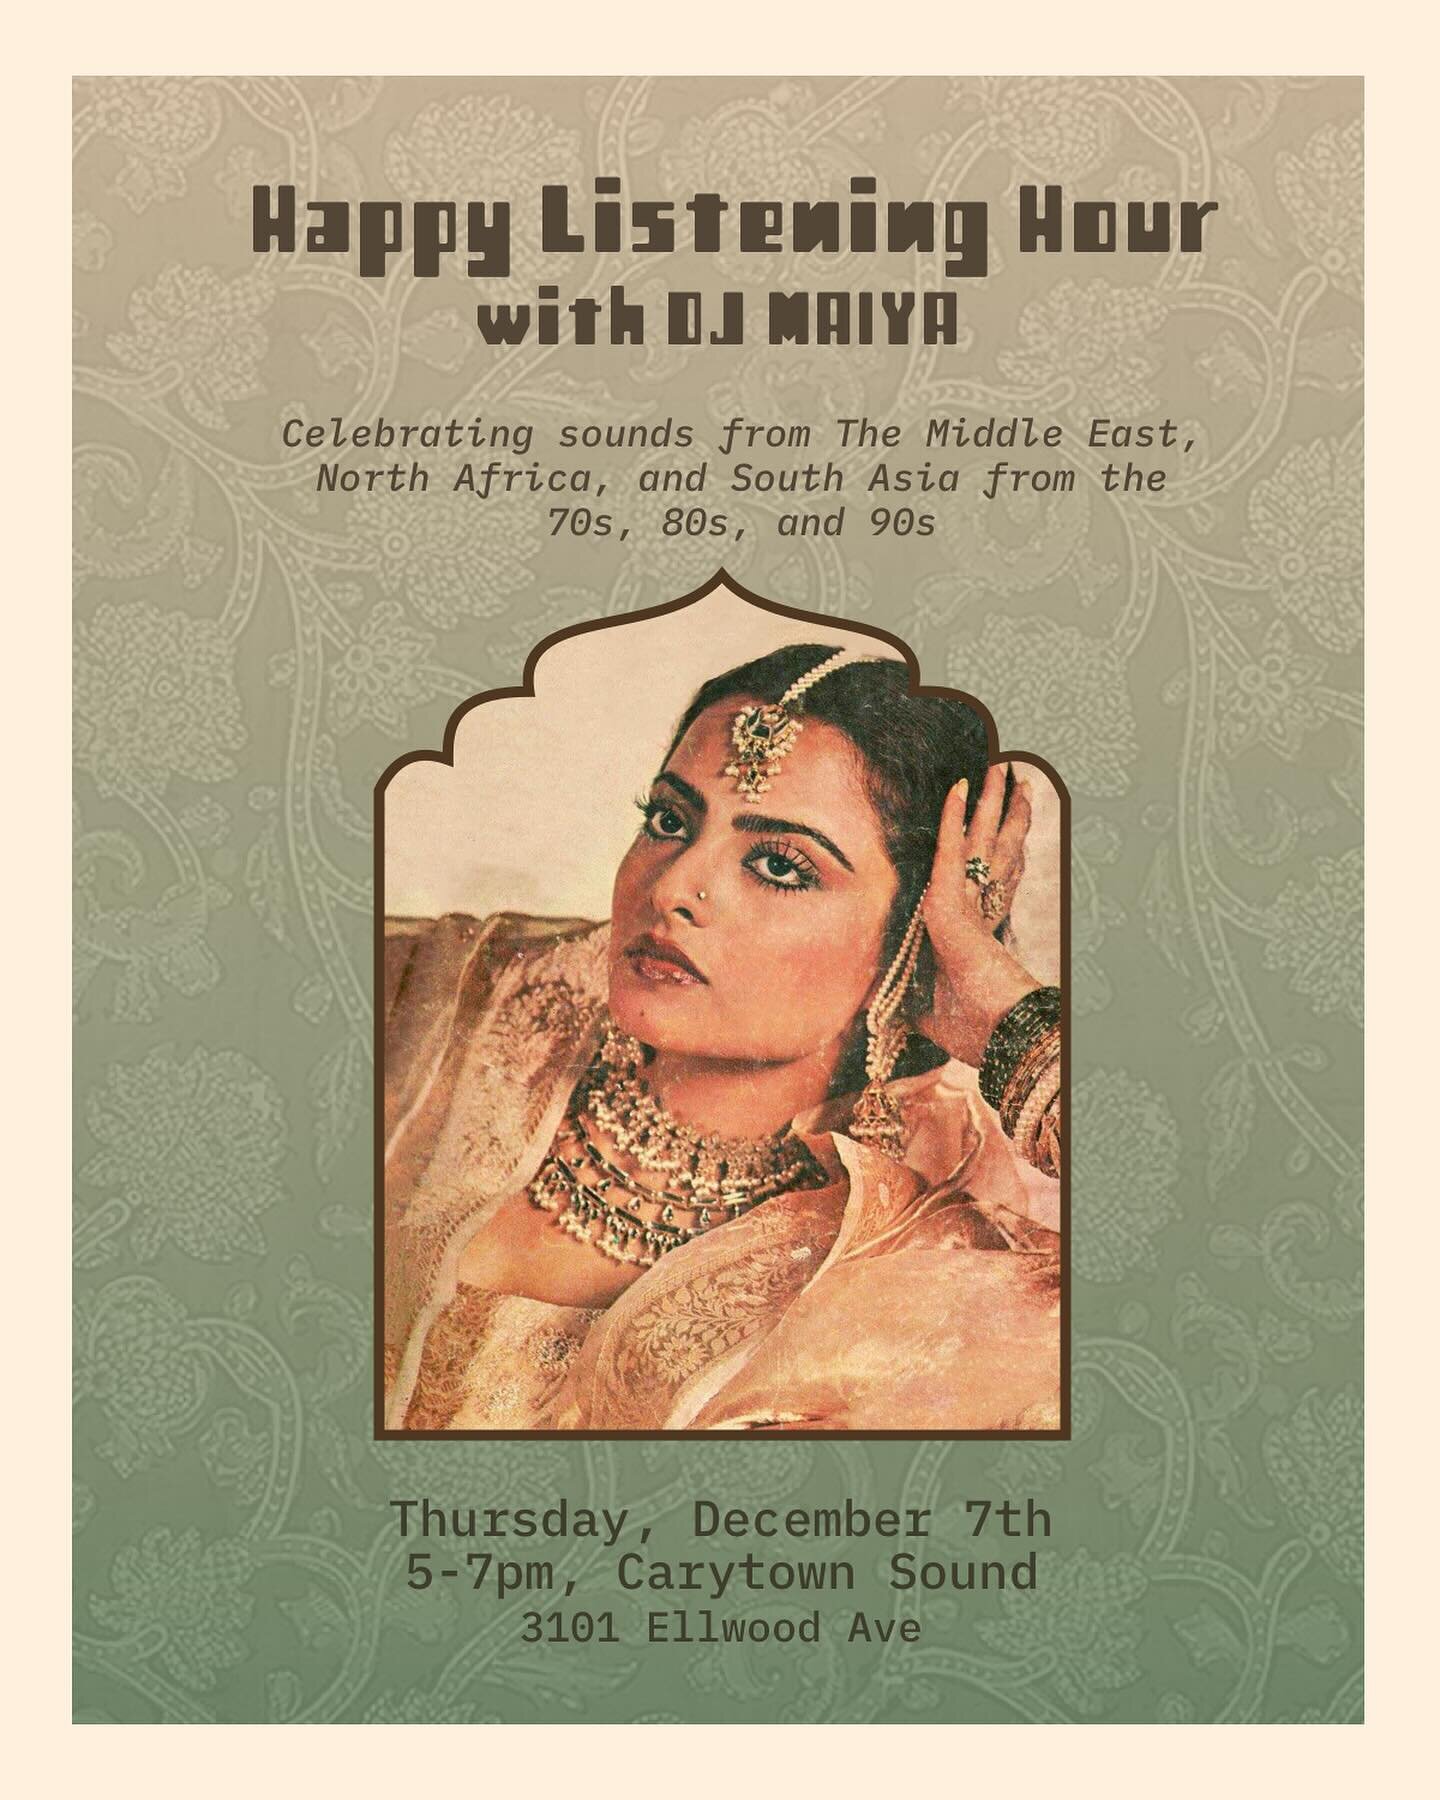 Tomorrow night! Join us for another happy listening hour, this time hosted by Dj Maiya! We&rsquo;ll be enjoying some retro sounds of the Middle East and more. Refreshments will be available as well 🍸 
#hifi #happyhour #listeningroom #djmaya #yodj #d